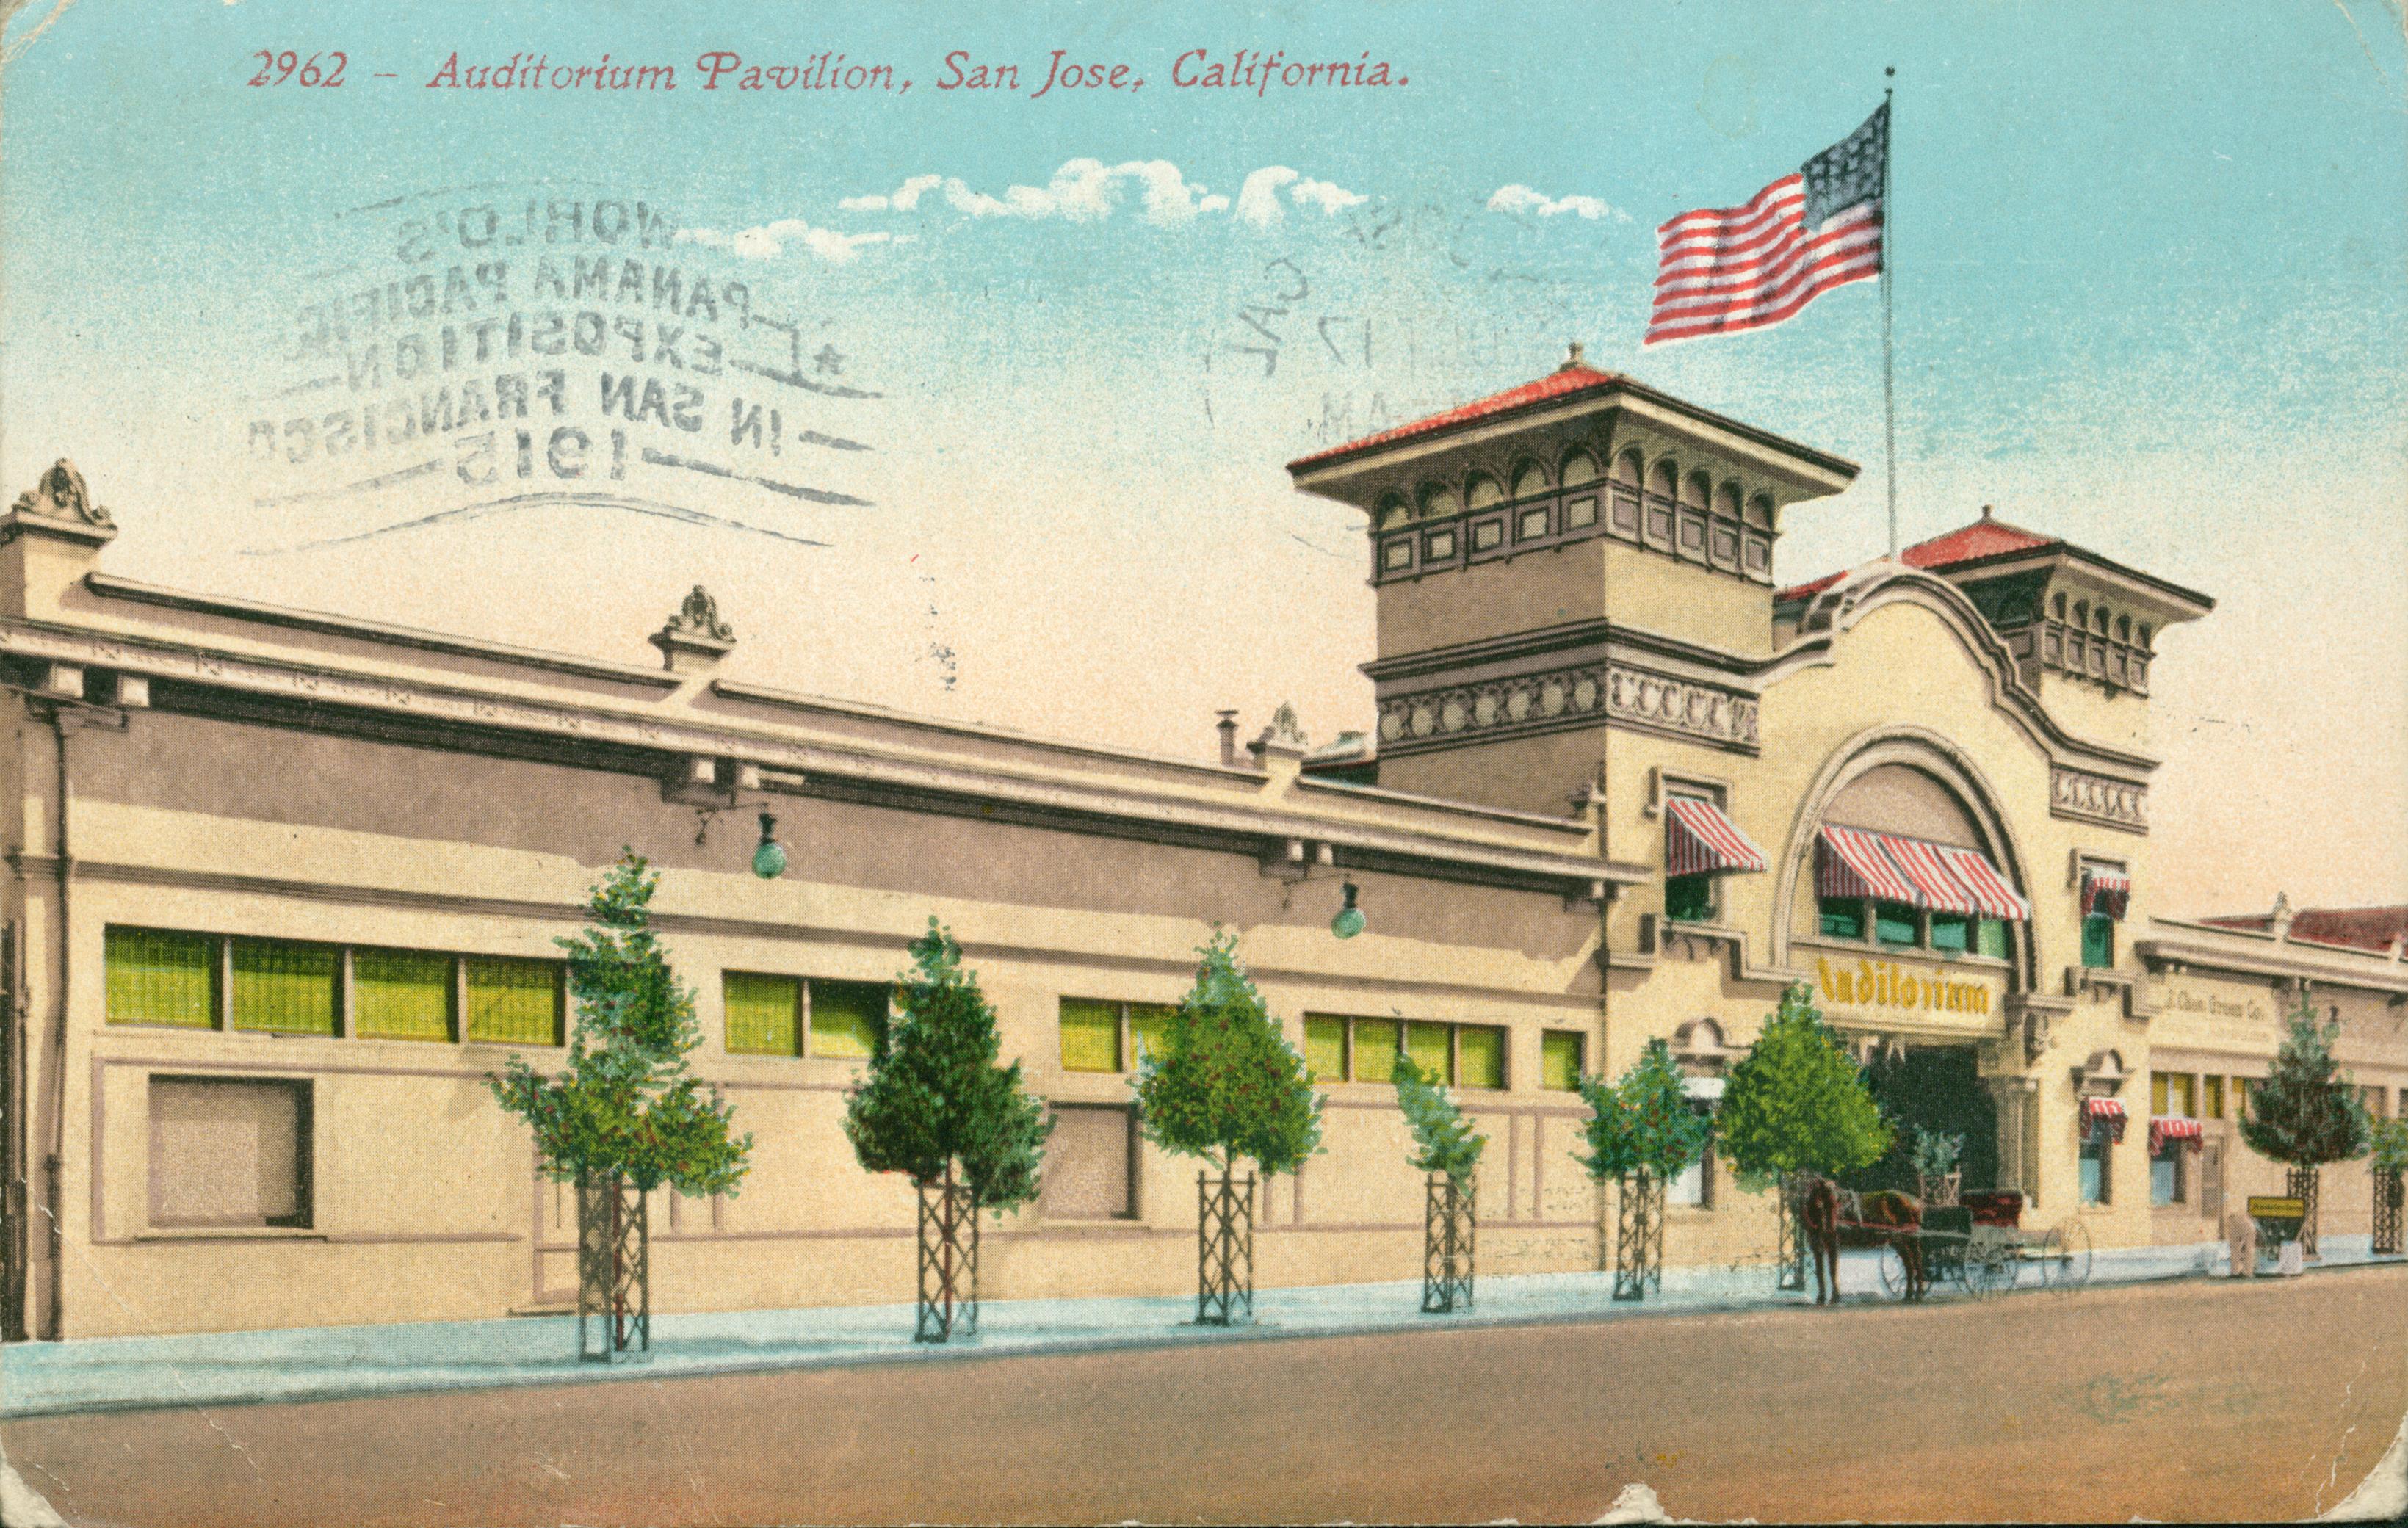 Exterior view of Auditorium Pavilion, small tree lined street with flag on top of building